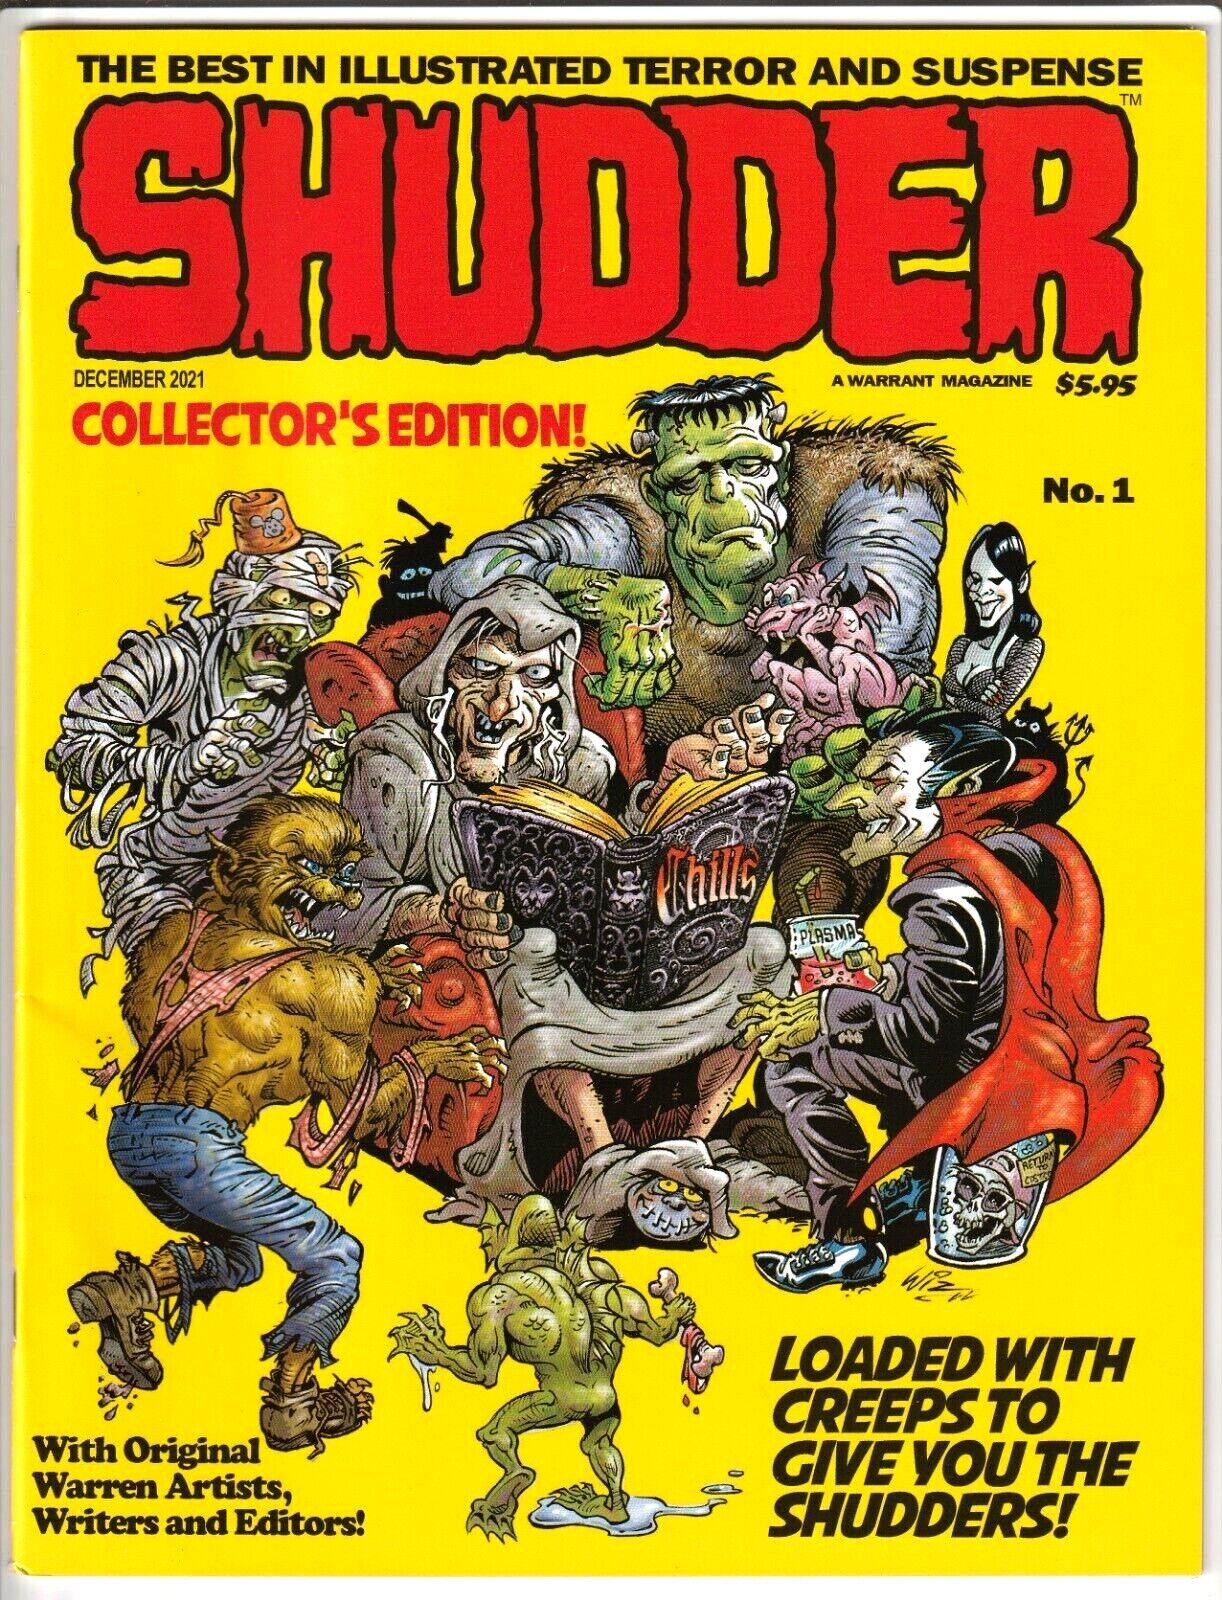 SHUDDER MAGAZINE ISSUES #1 - 17 & ANNUALS NEW UNREAD COPIES  - YOU PICK